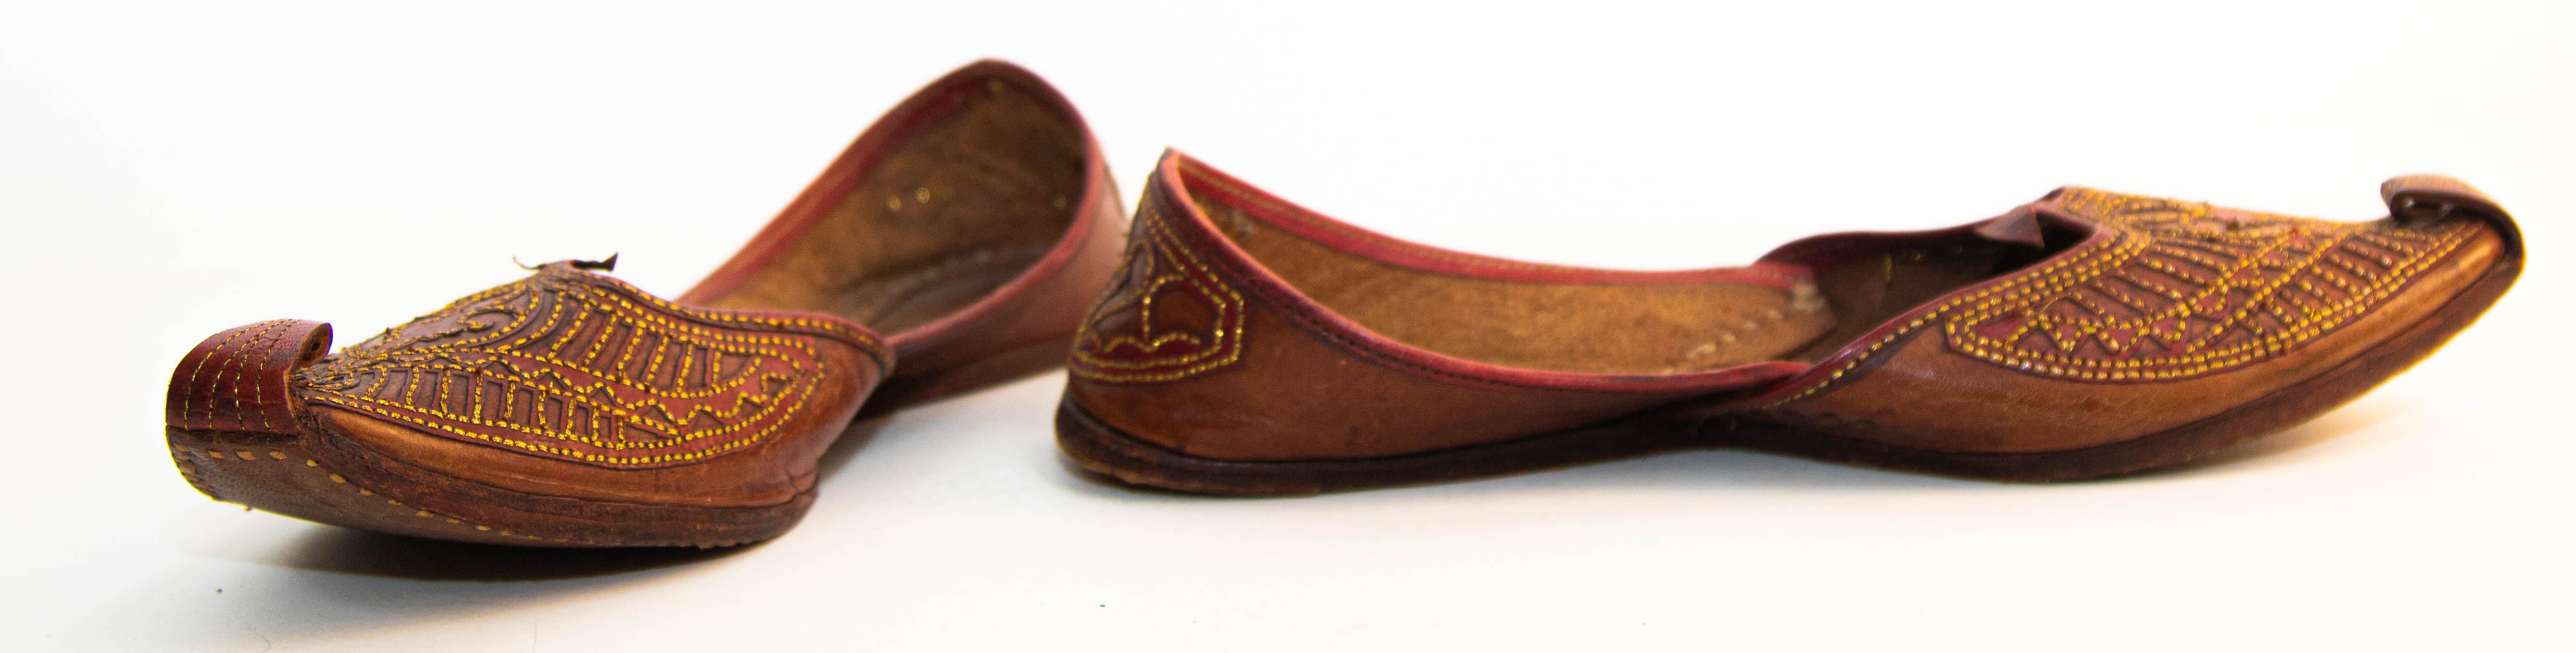 Vintage Arabian Mughal Leather Shoes with Gold Embroidered Curled Toe For Sale 3